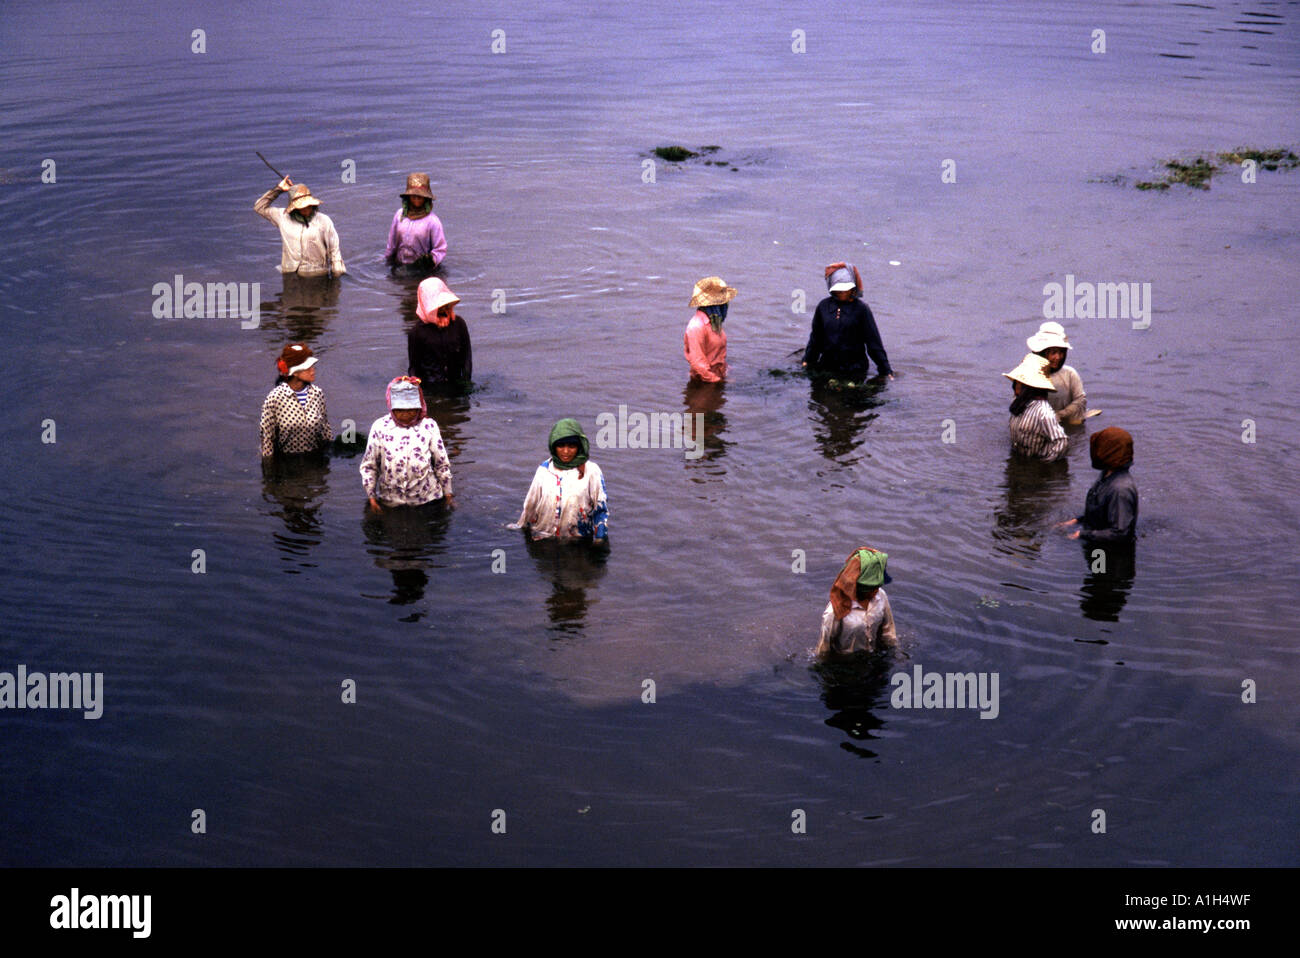 Women cleaning out the moat around Angkor Wat in Cambodia Stock Photo